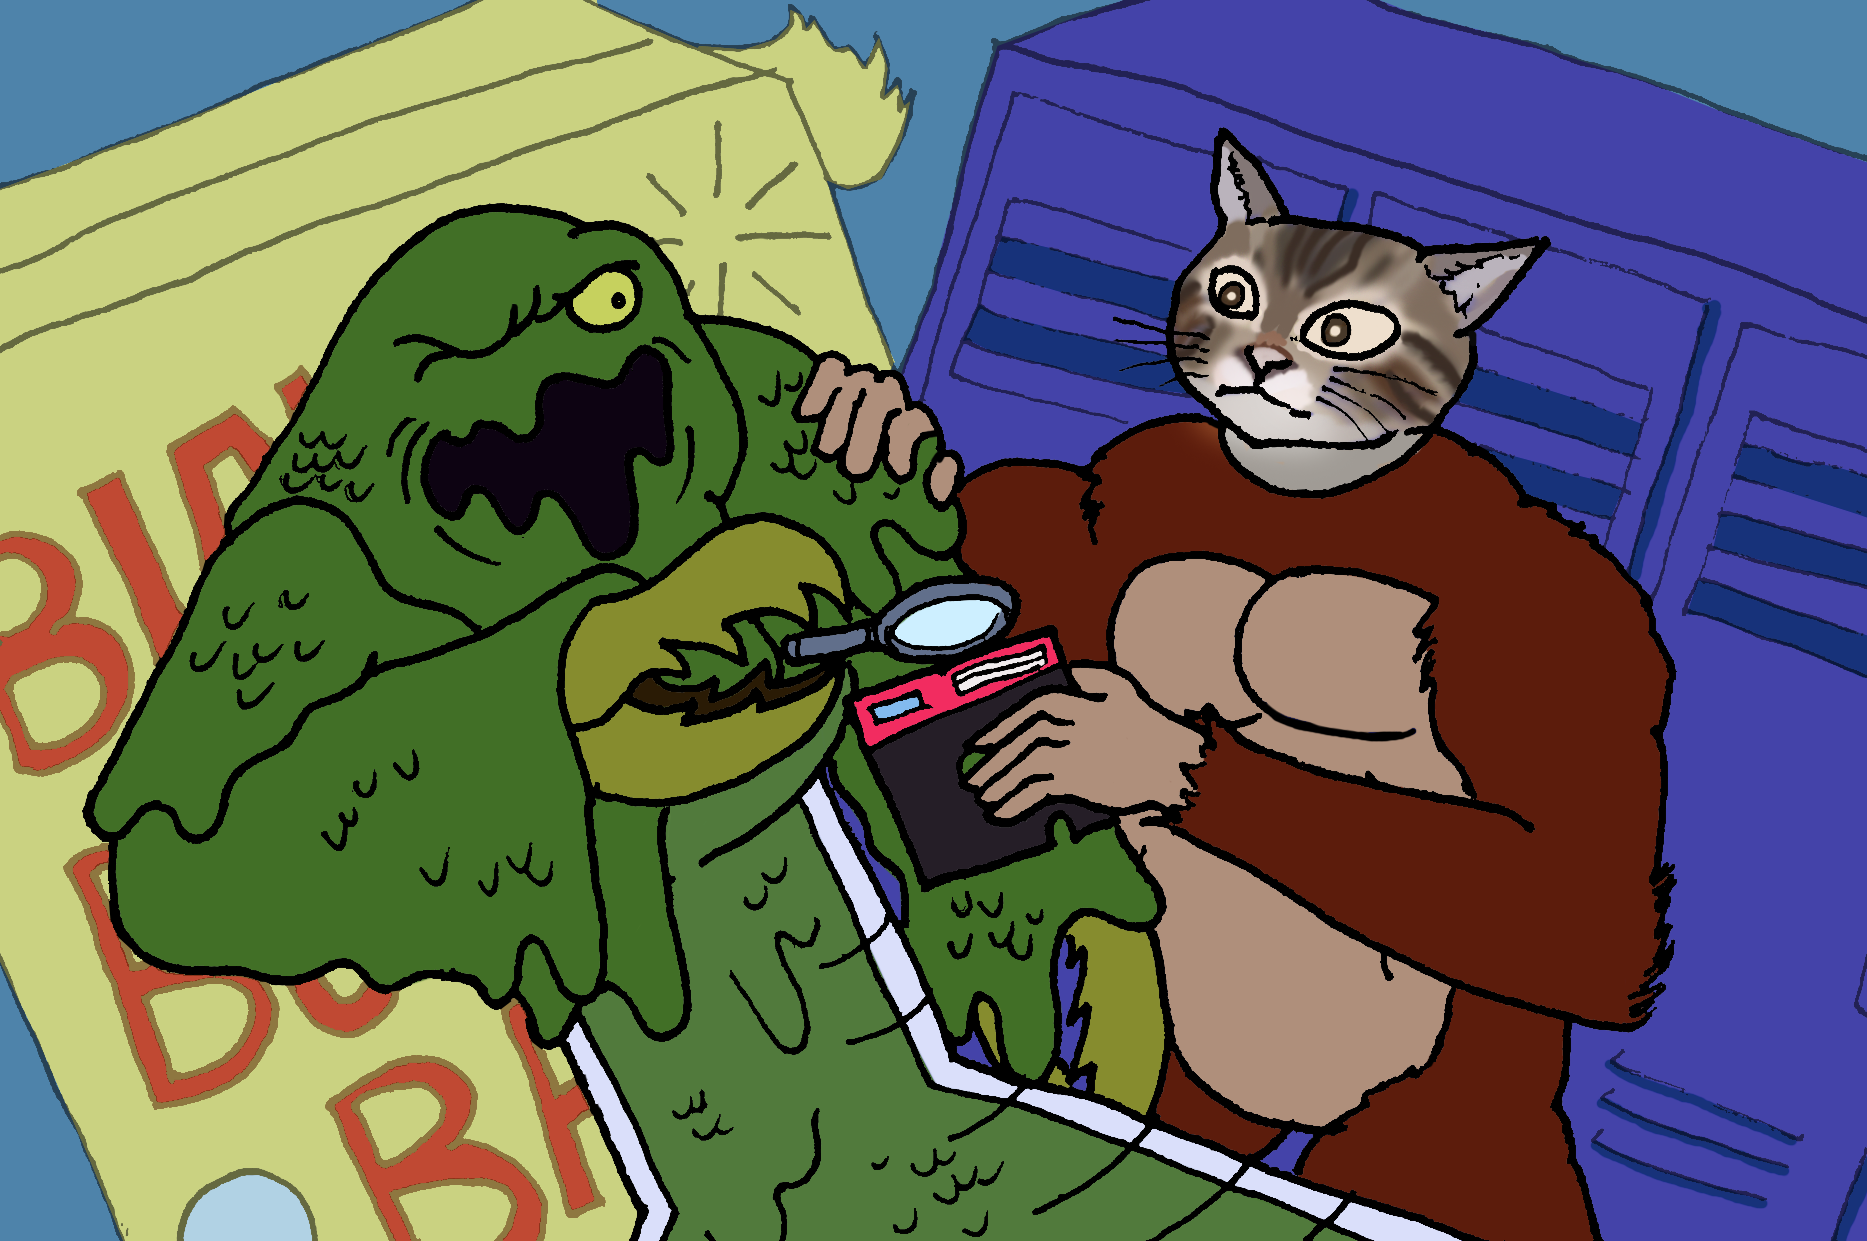   Scooby Dudes  - Episode 21: "The Creature Came from Chem Lab / No Thanks, Masked Manx" - Title Card by Evan Yeong 